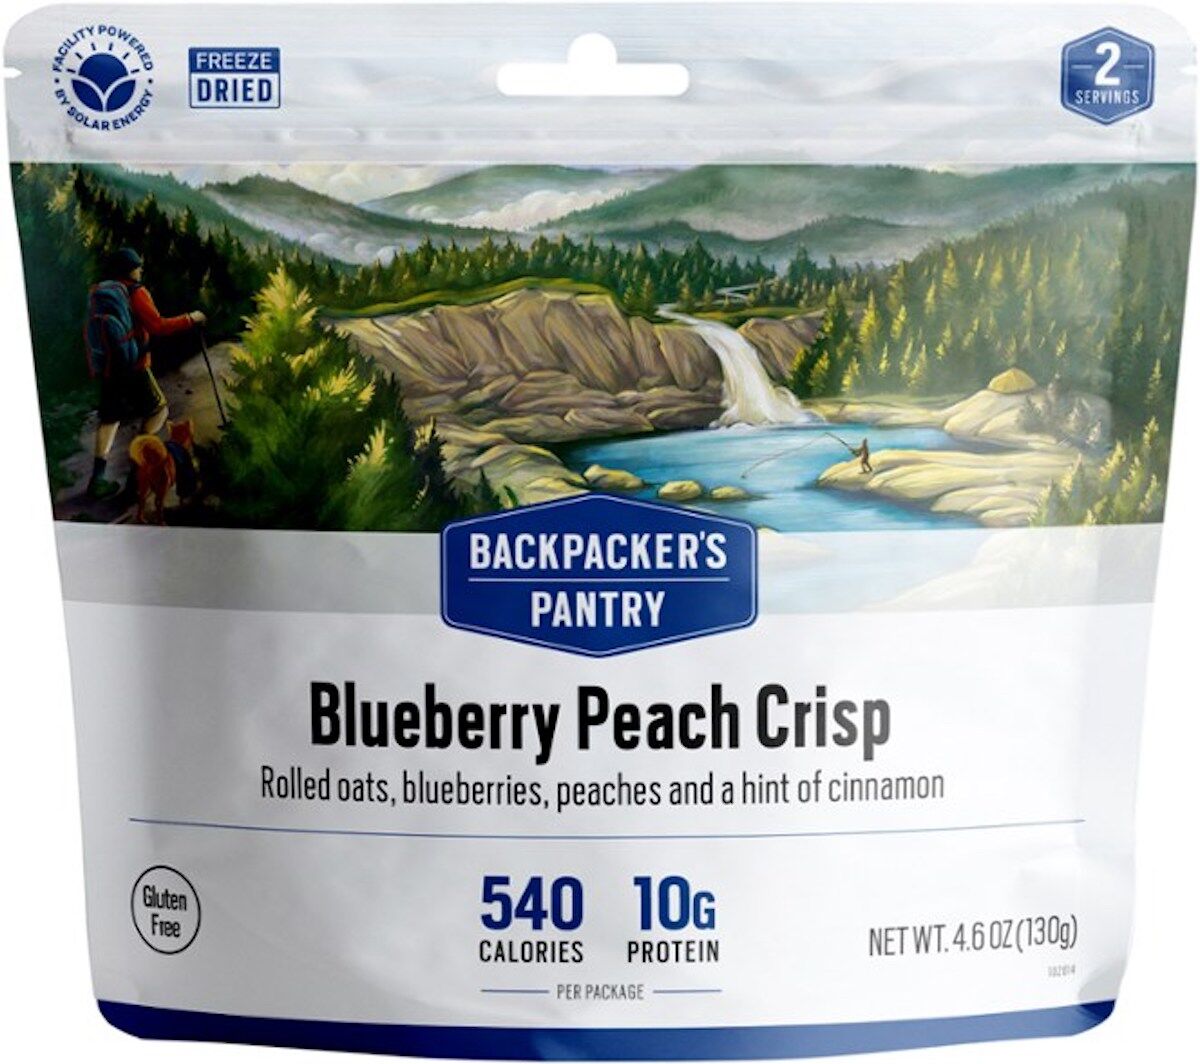 Backpacker's Pantry peach bluberry crisp with a illustration of a river on the packaging